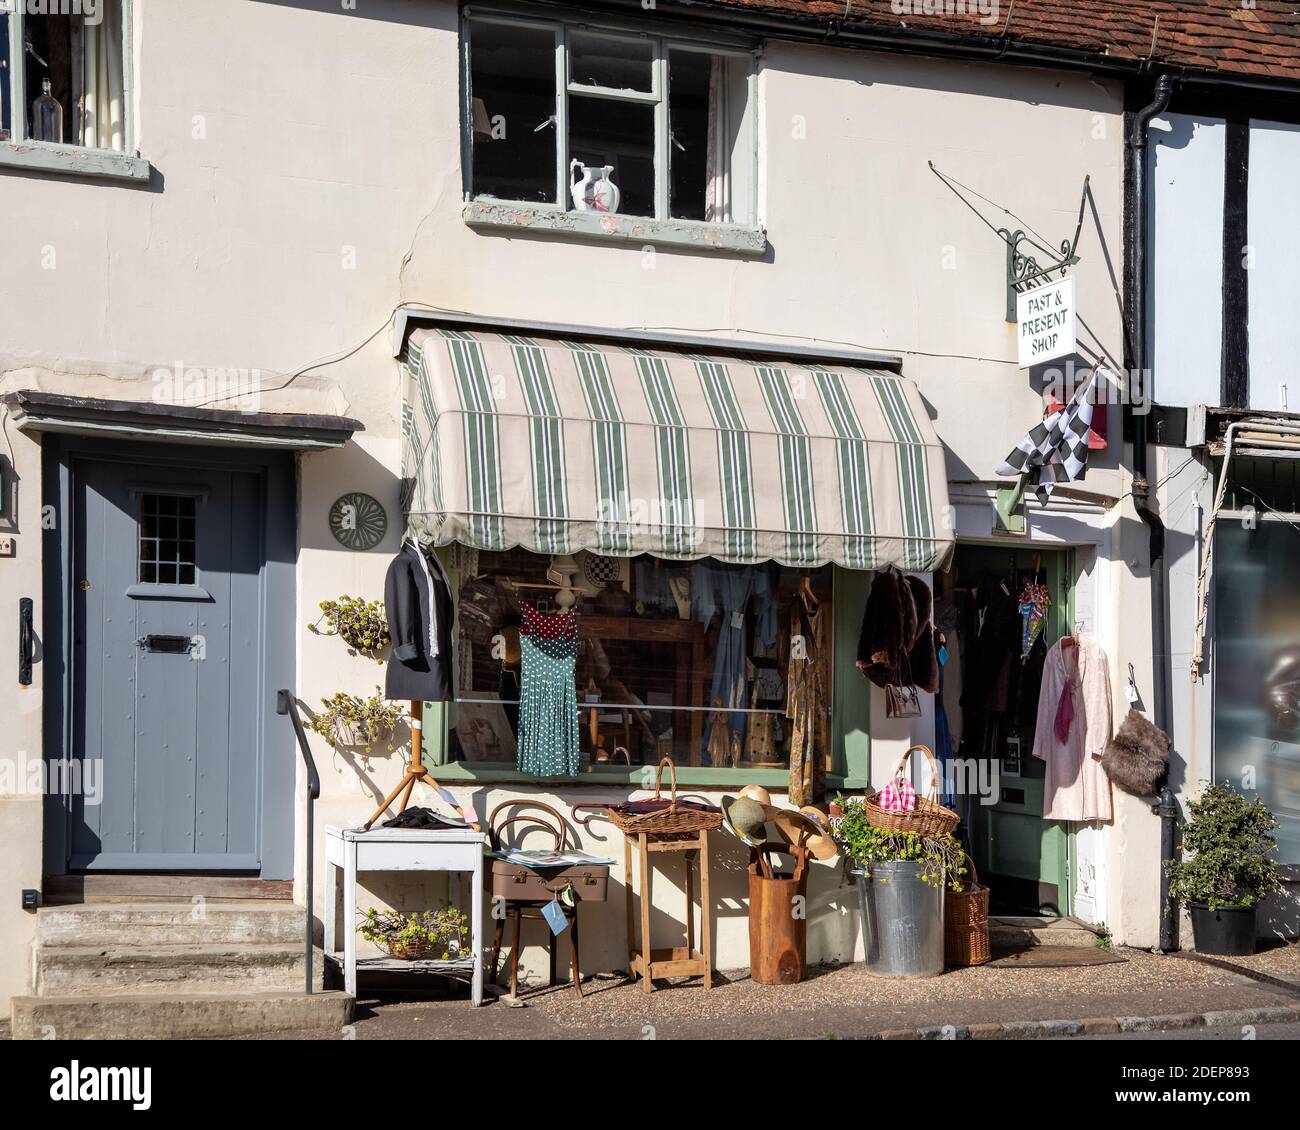 PETWORTH, WEST SUSSEX, UK - SEPTEMBER 14, 2019:  Exterior view of pretty antique bric-a-brac shop in the High Street Stock Photo